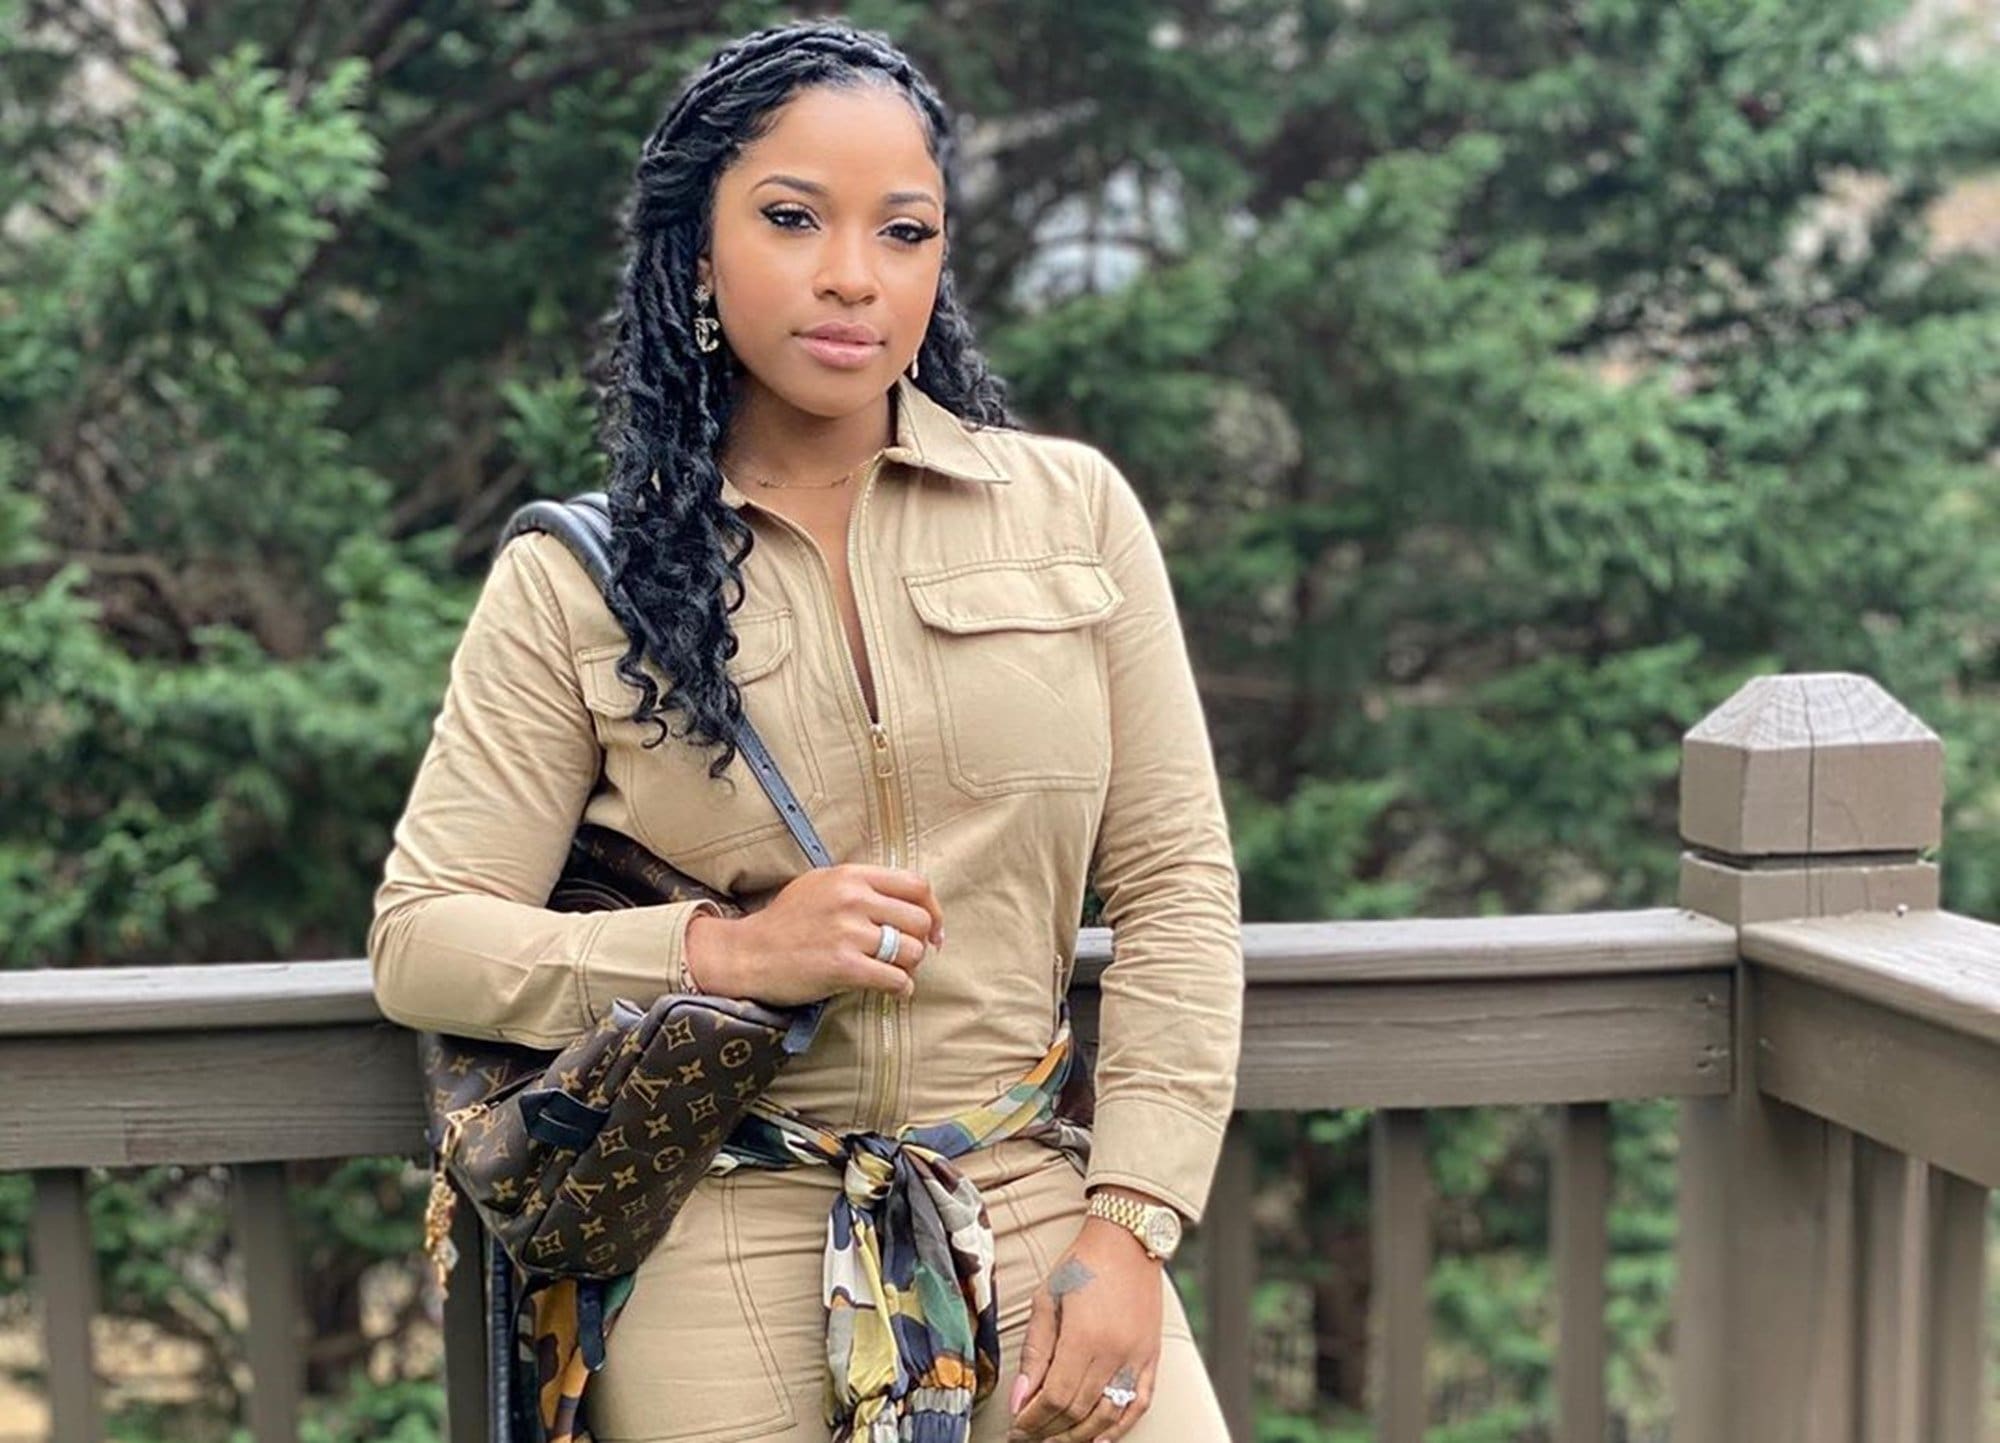 Toya Johnson Has News About Her Natural Hair